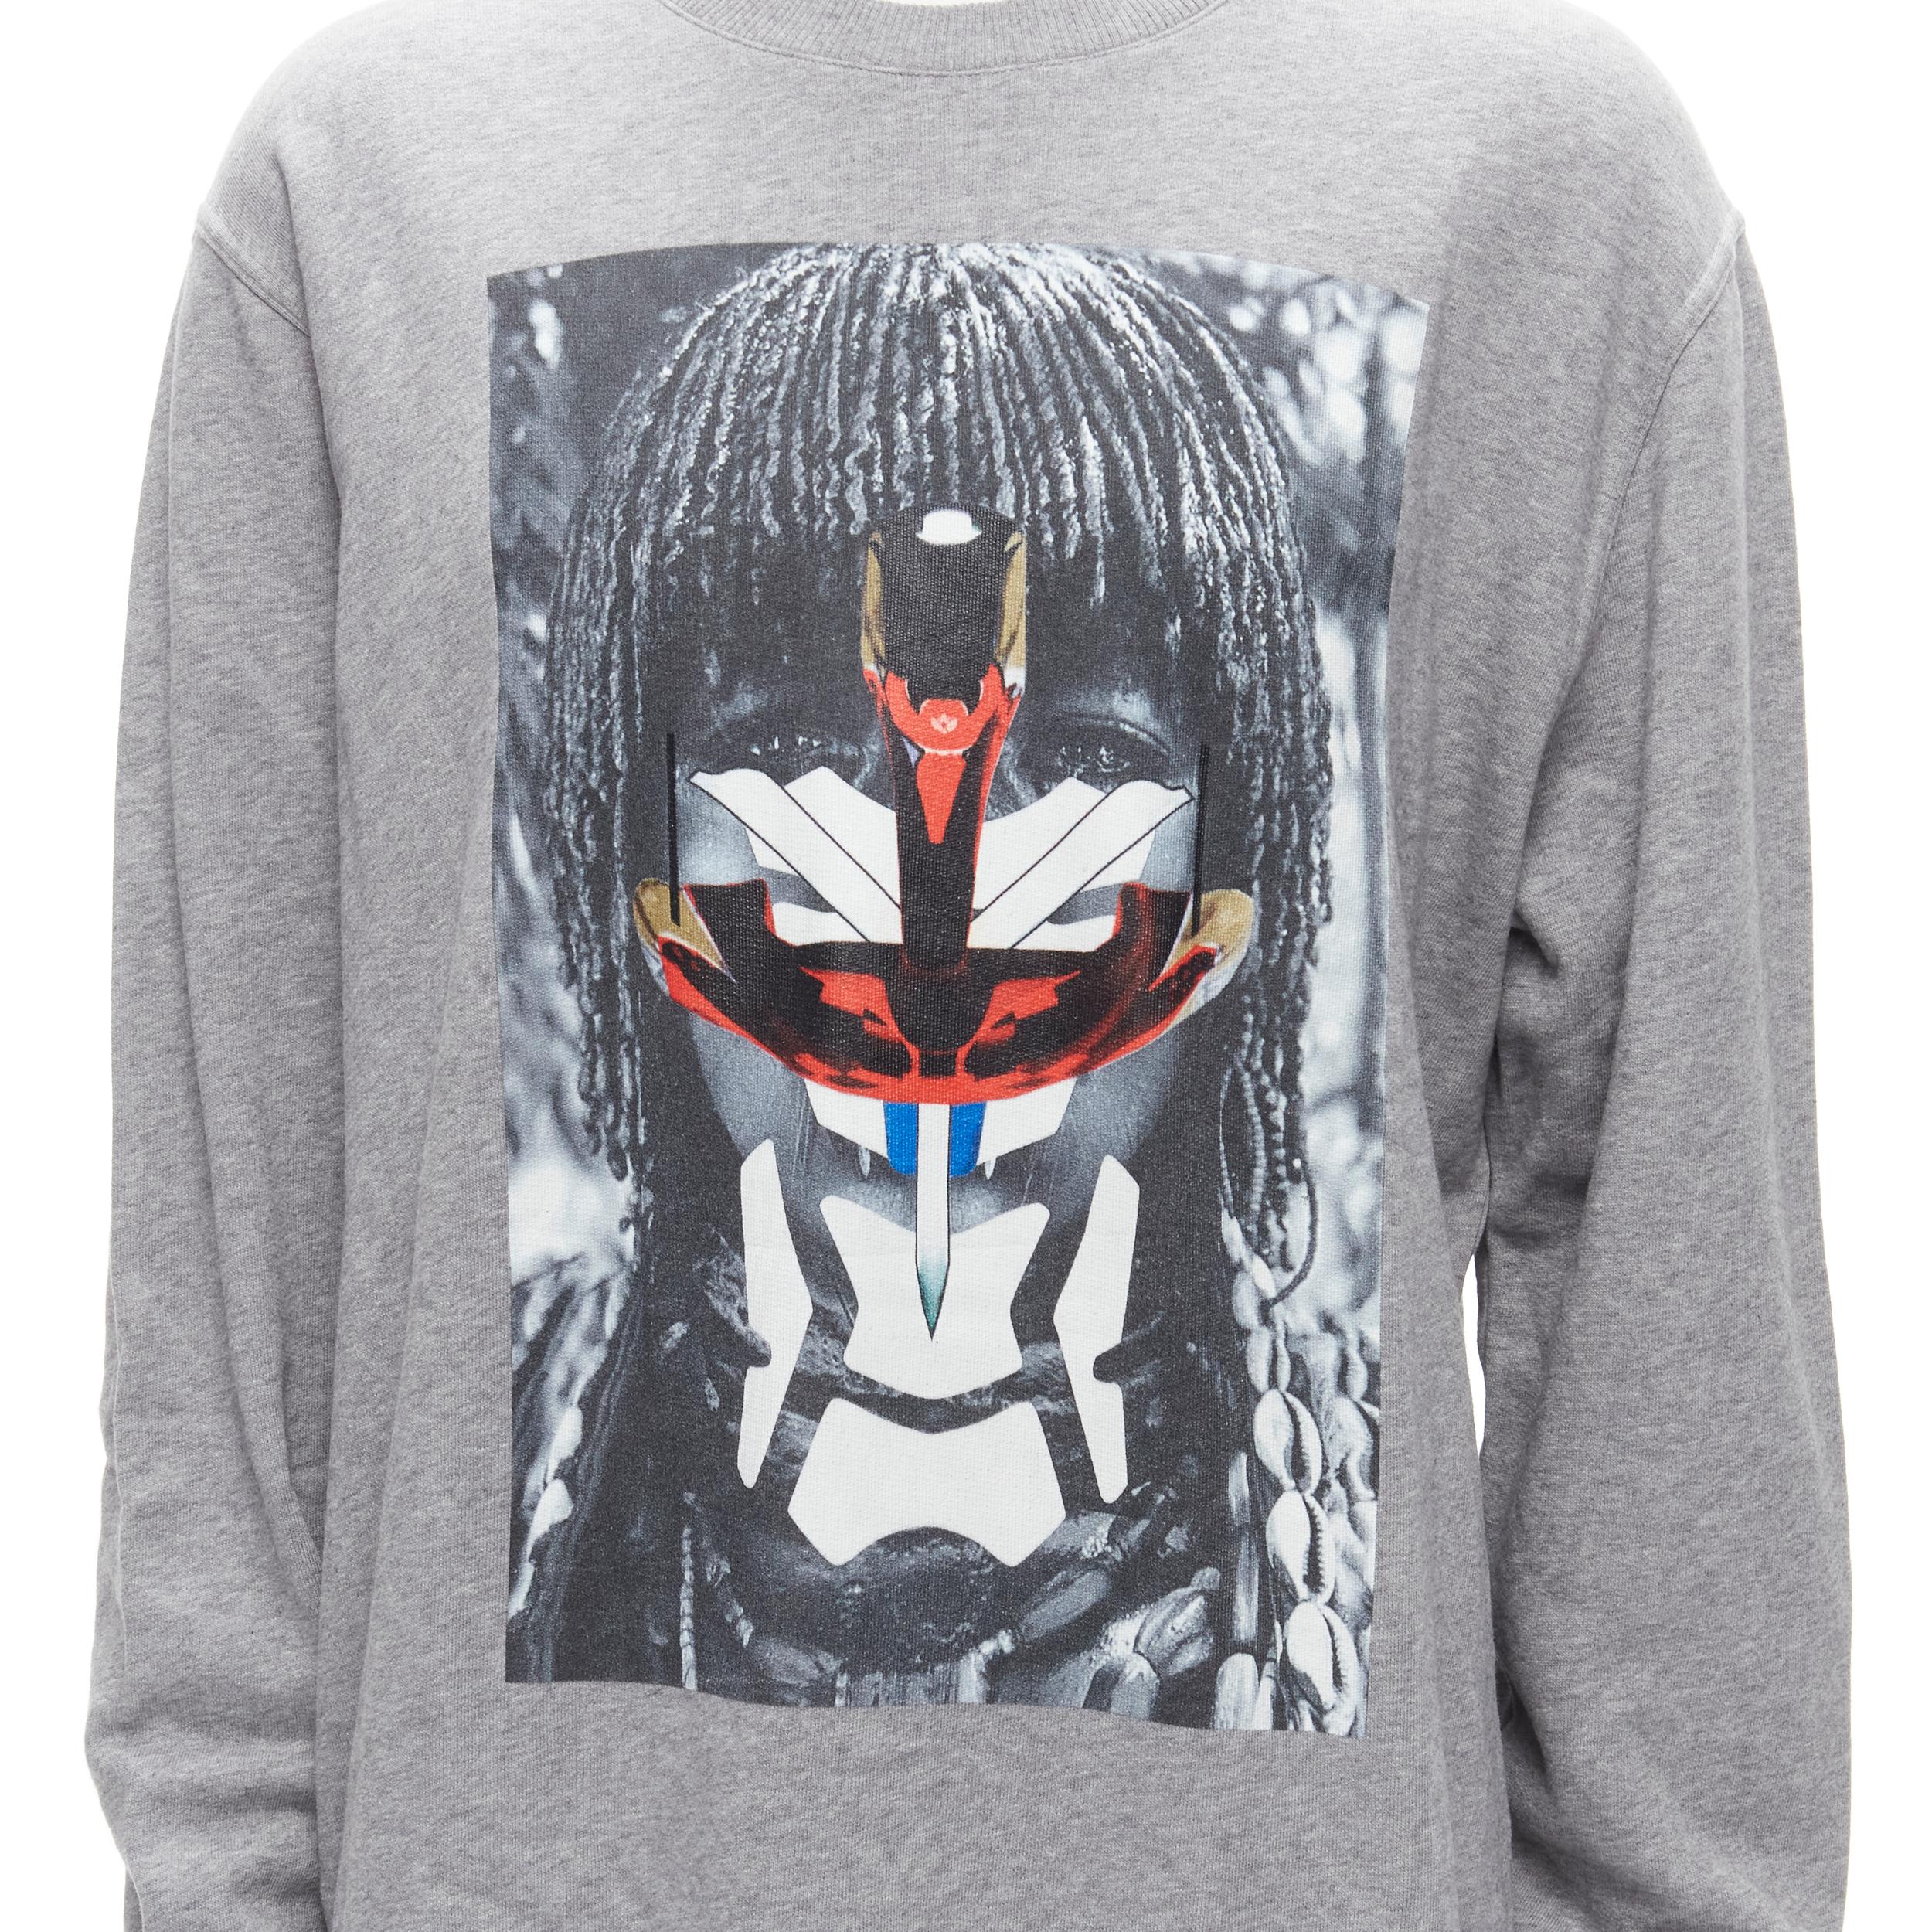 GIVENCHY Riccardo Tisci grey tribal girl graphic print cotton crew sweater S
Reference: YNWG/A00102
Brand: Givenchy
Designer: Riccardo Tisci
Material: Cotton
Color: Grey
Pattern: Photographic Print
Closure: Pullover
Extra Details: Signature cross